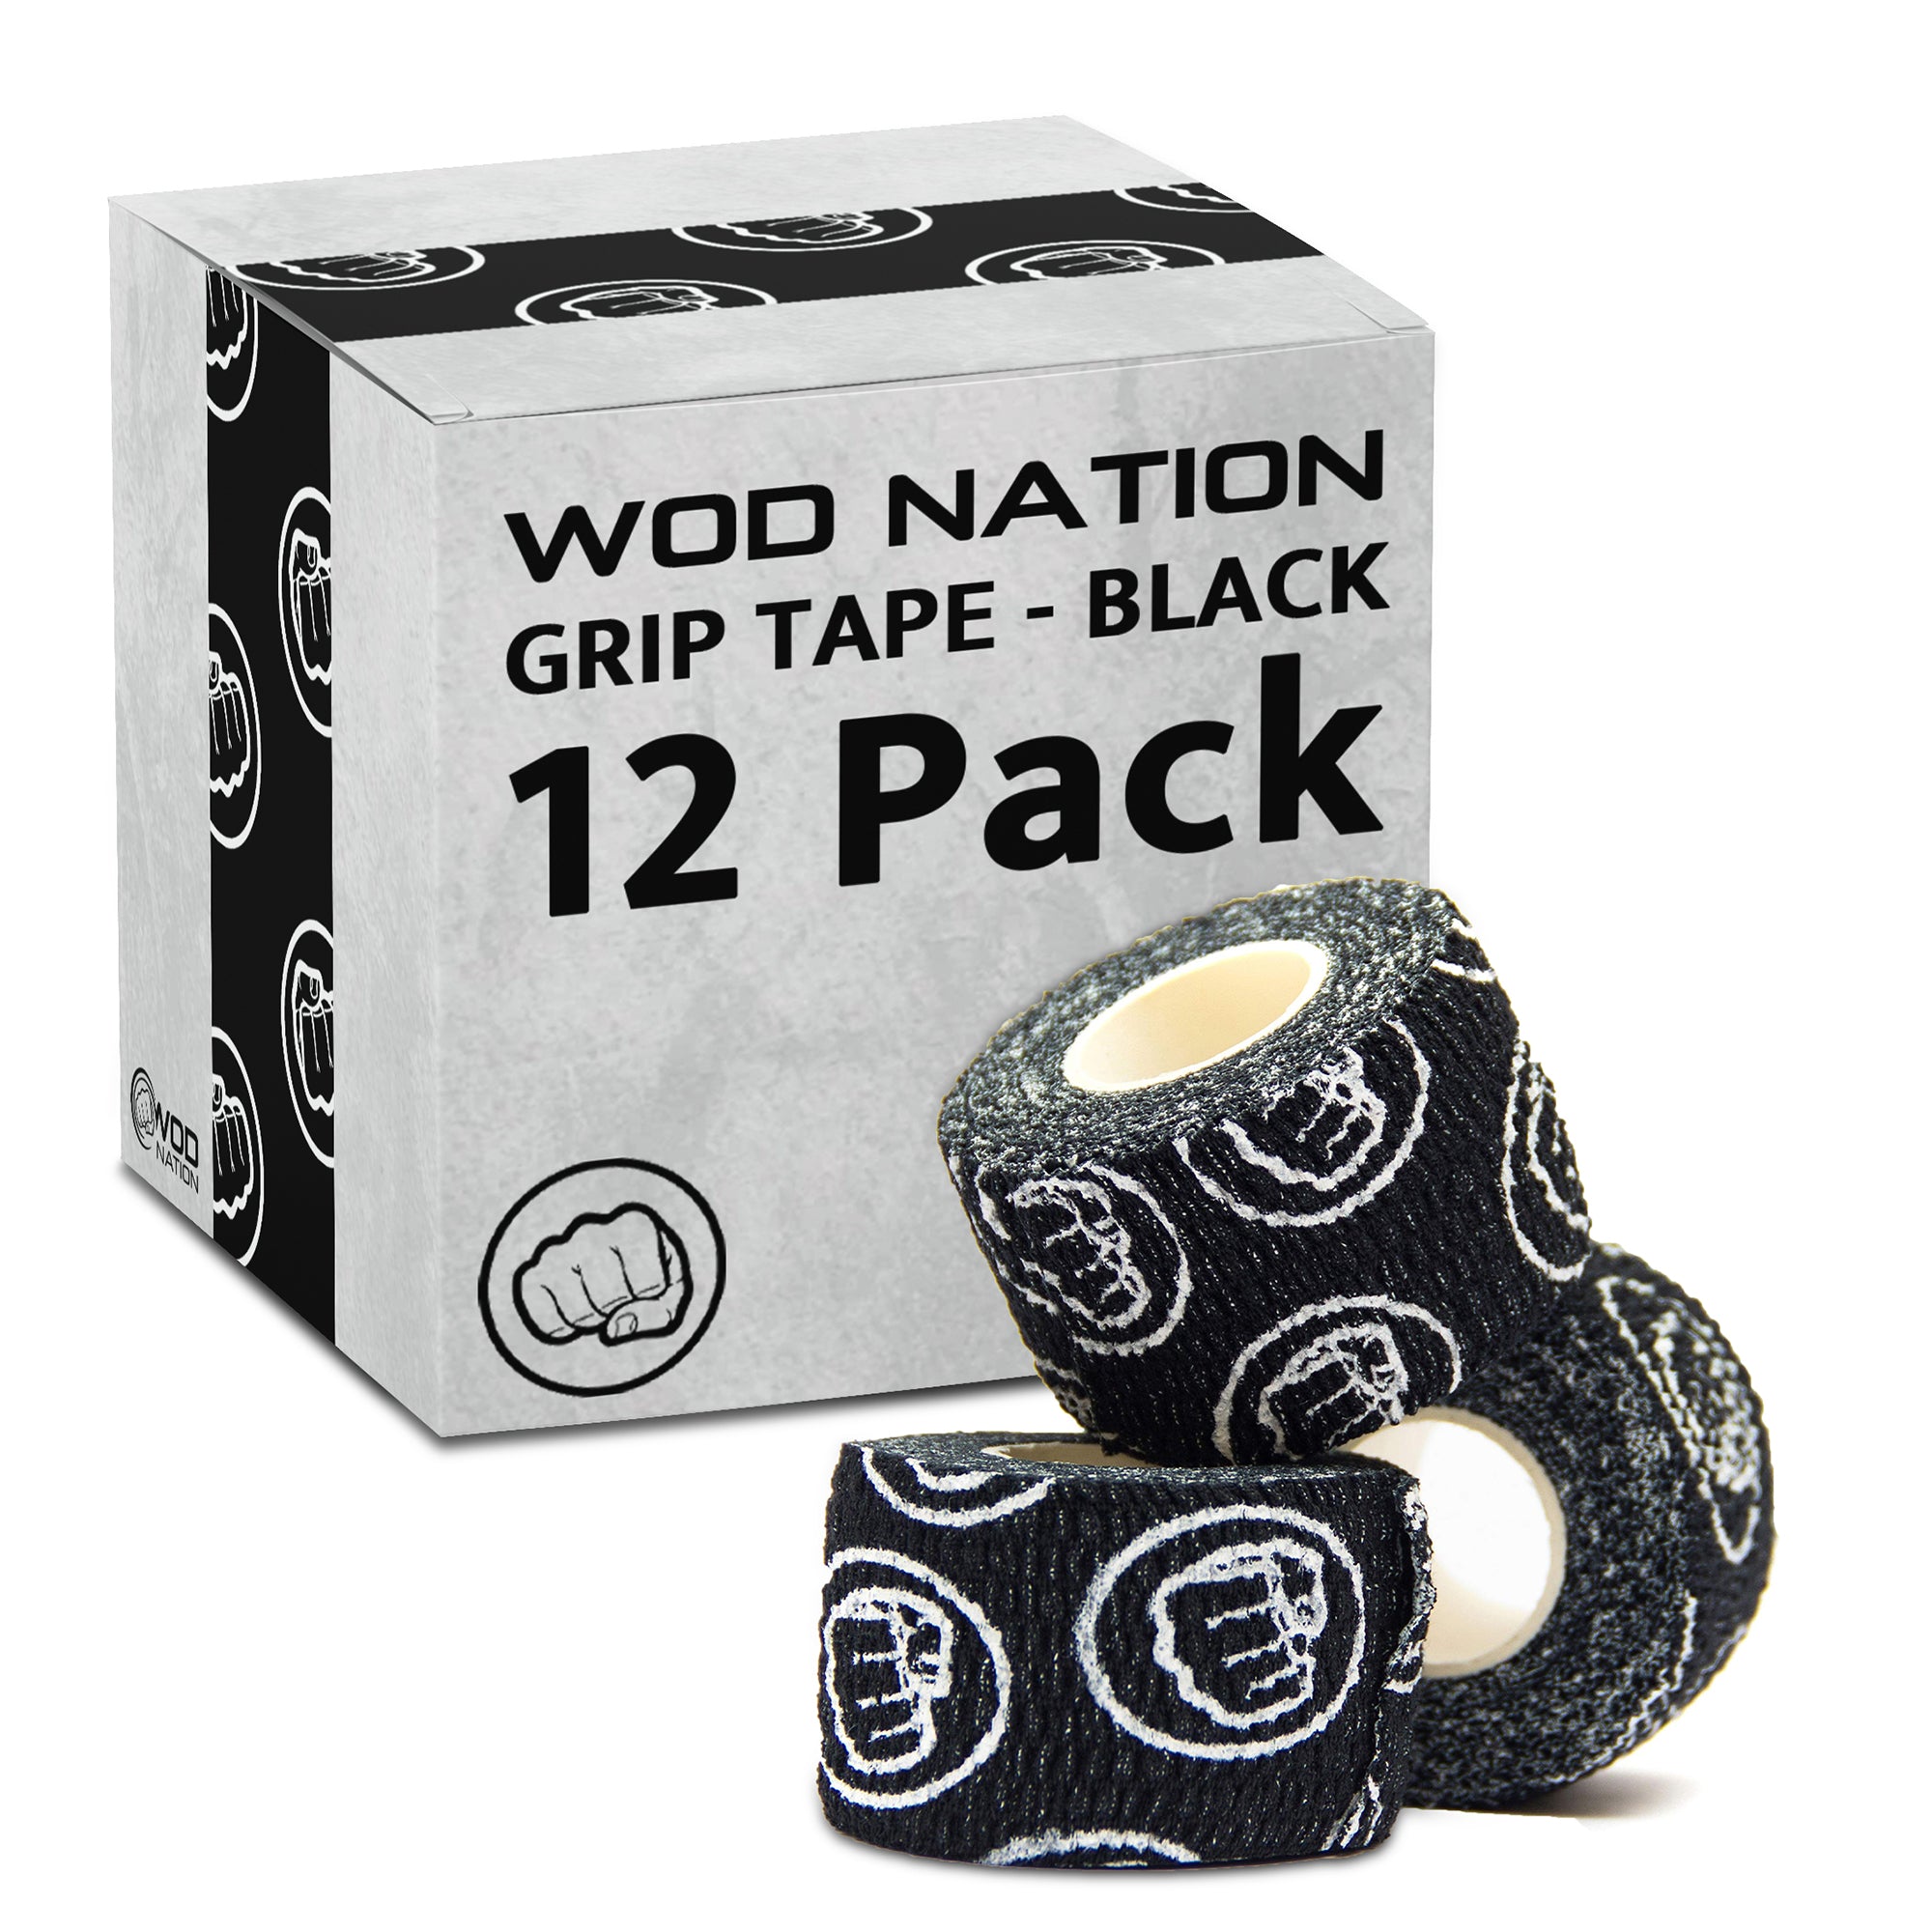 Goat Tape Super Stretchy Thumb Tape - Weightlifting Hook Grip Tape & WOD  Tape for Cross Training, Gym Workout Tape, Athletic Finger Wrap - Flexes  with